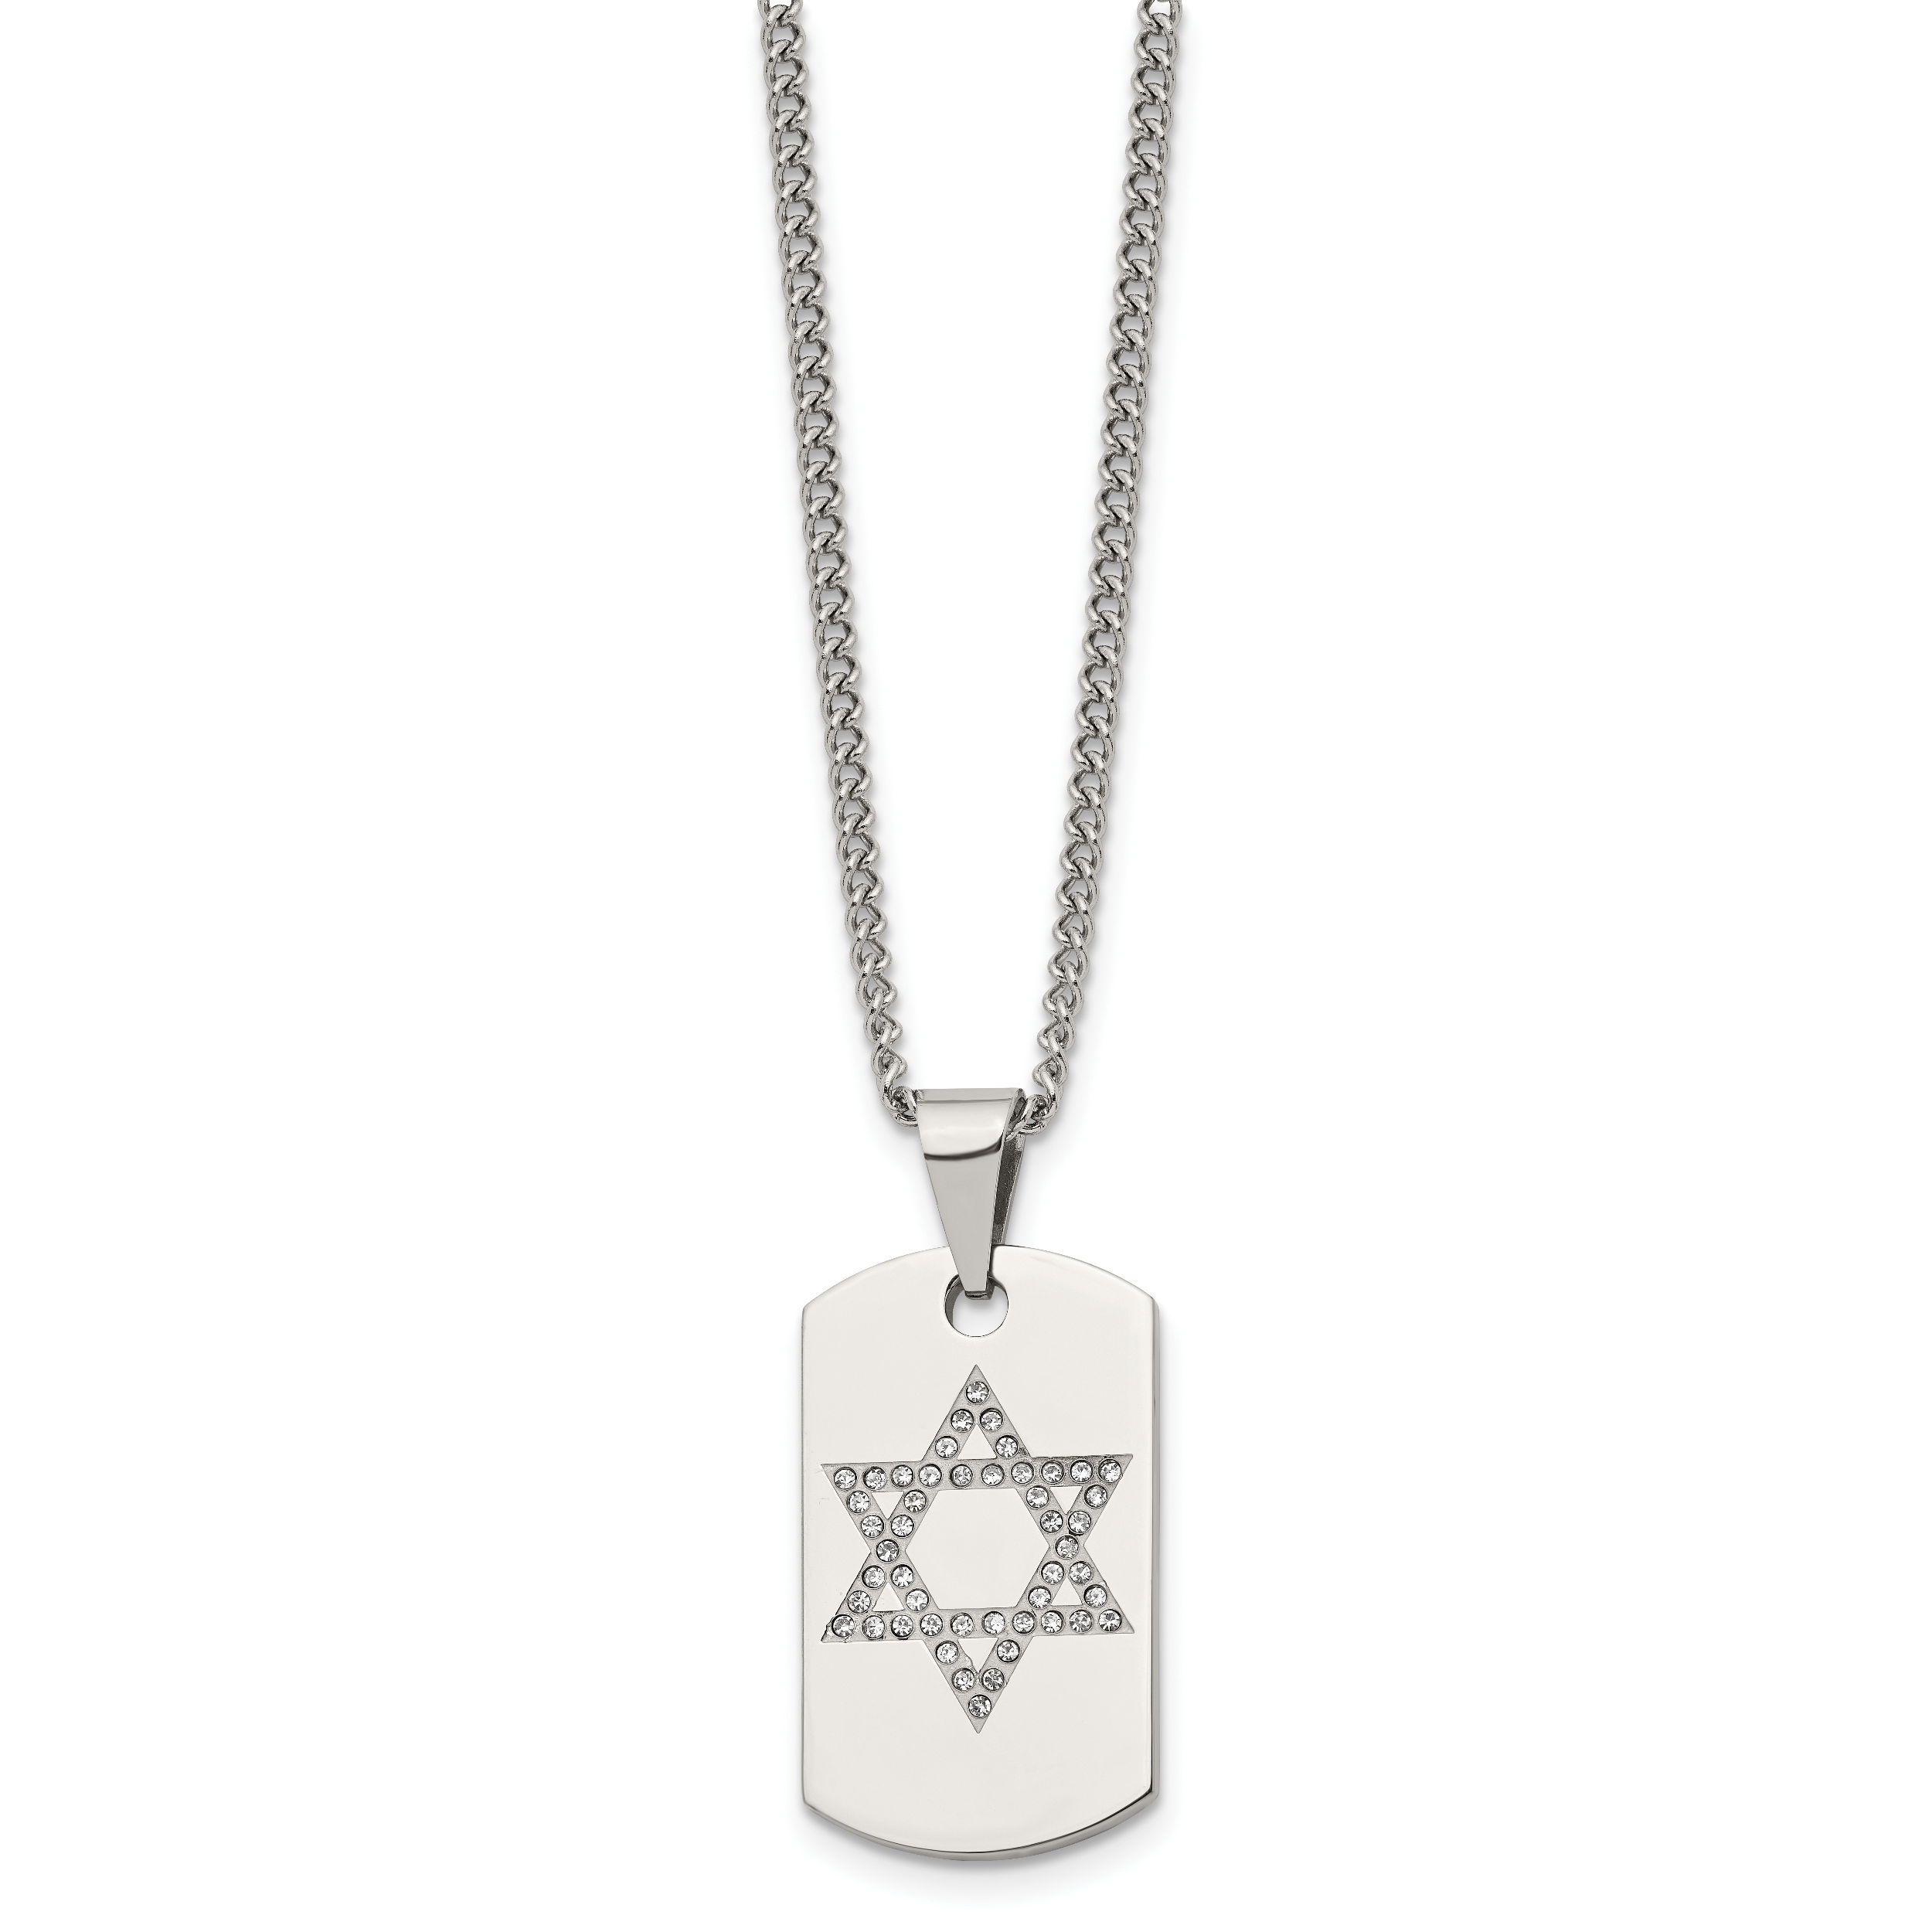 Shop4Silver Stainless Steel Star Of David Cz Dog Tag Polished Necklace 